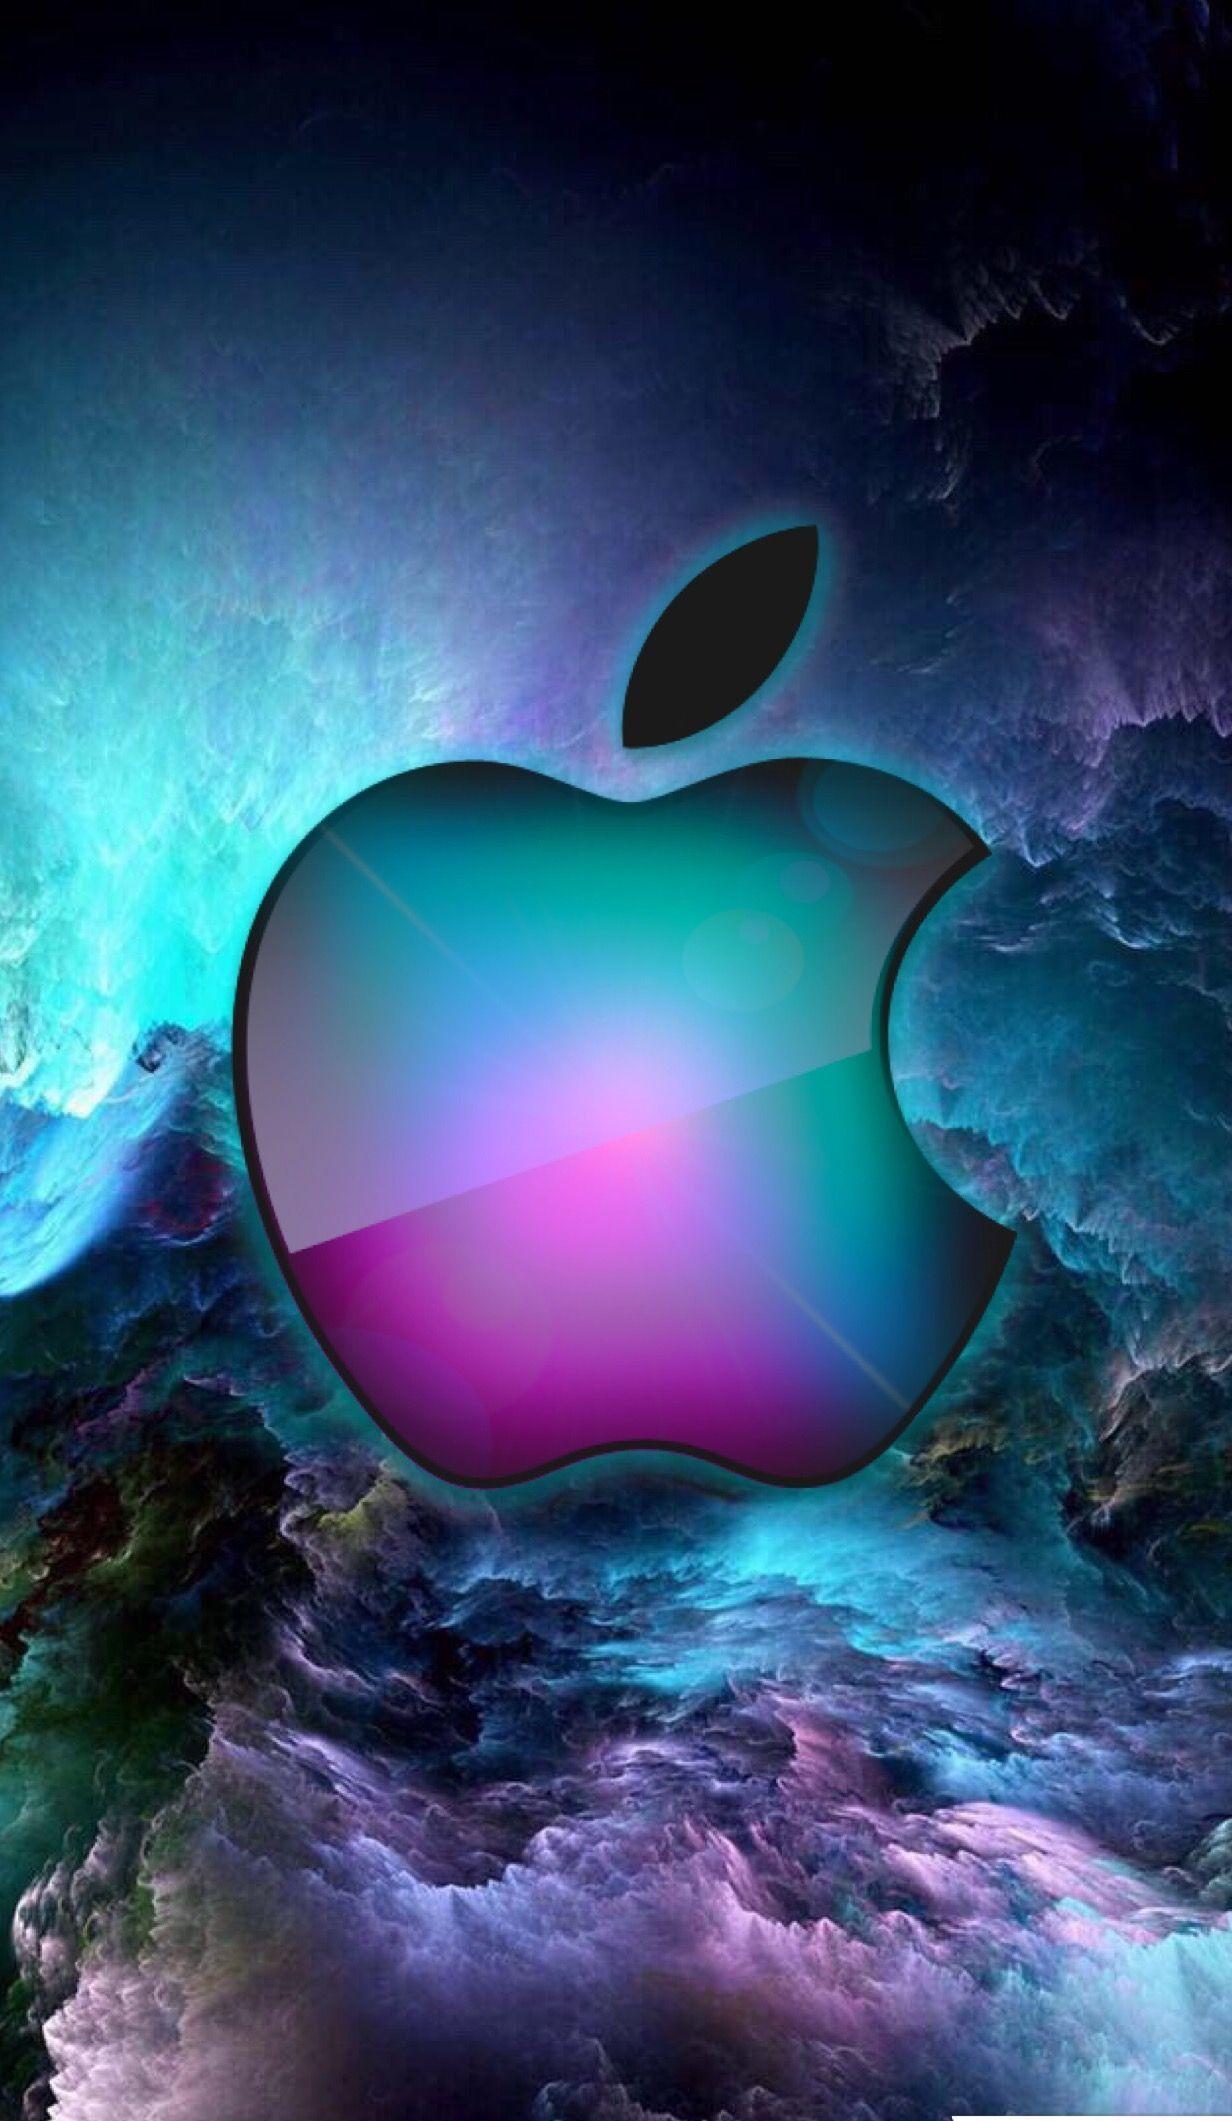 Cool Apple Logo Iphone Wallpapers Top Free Cool Apple Logo Iphone